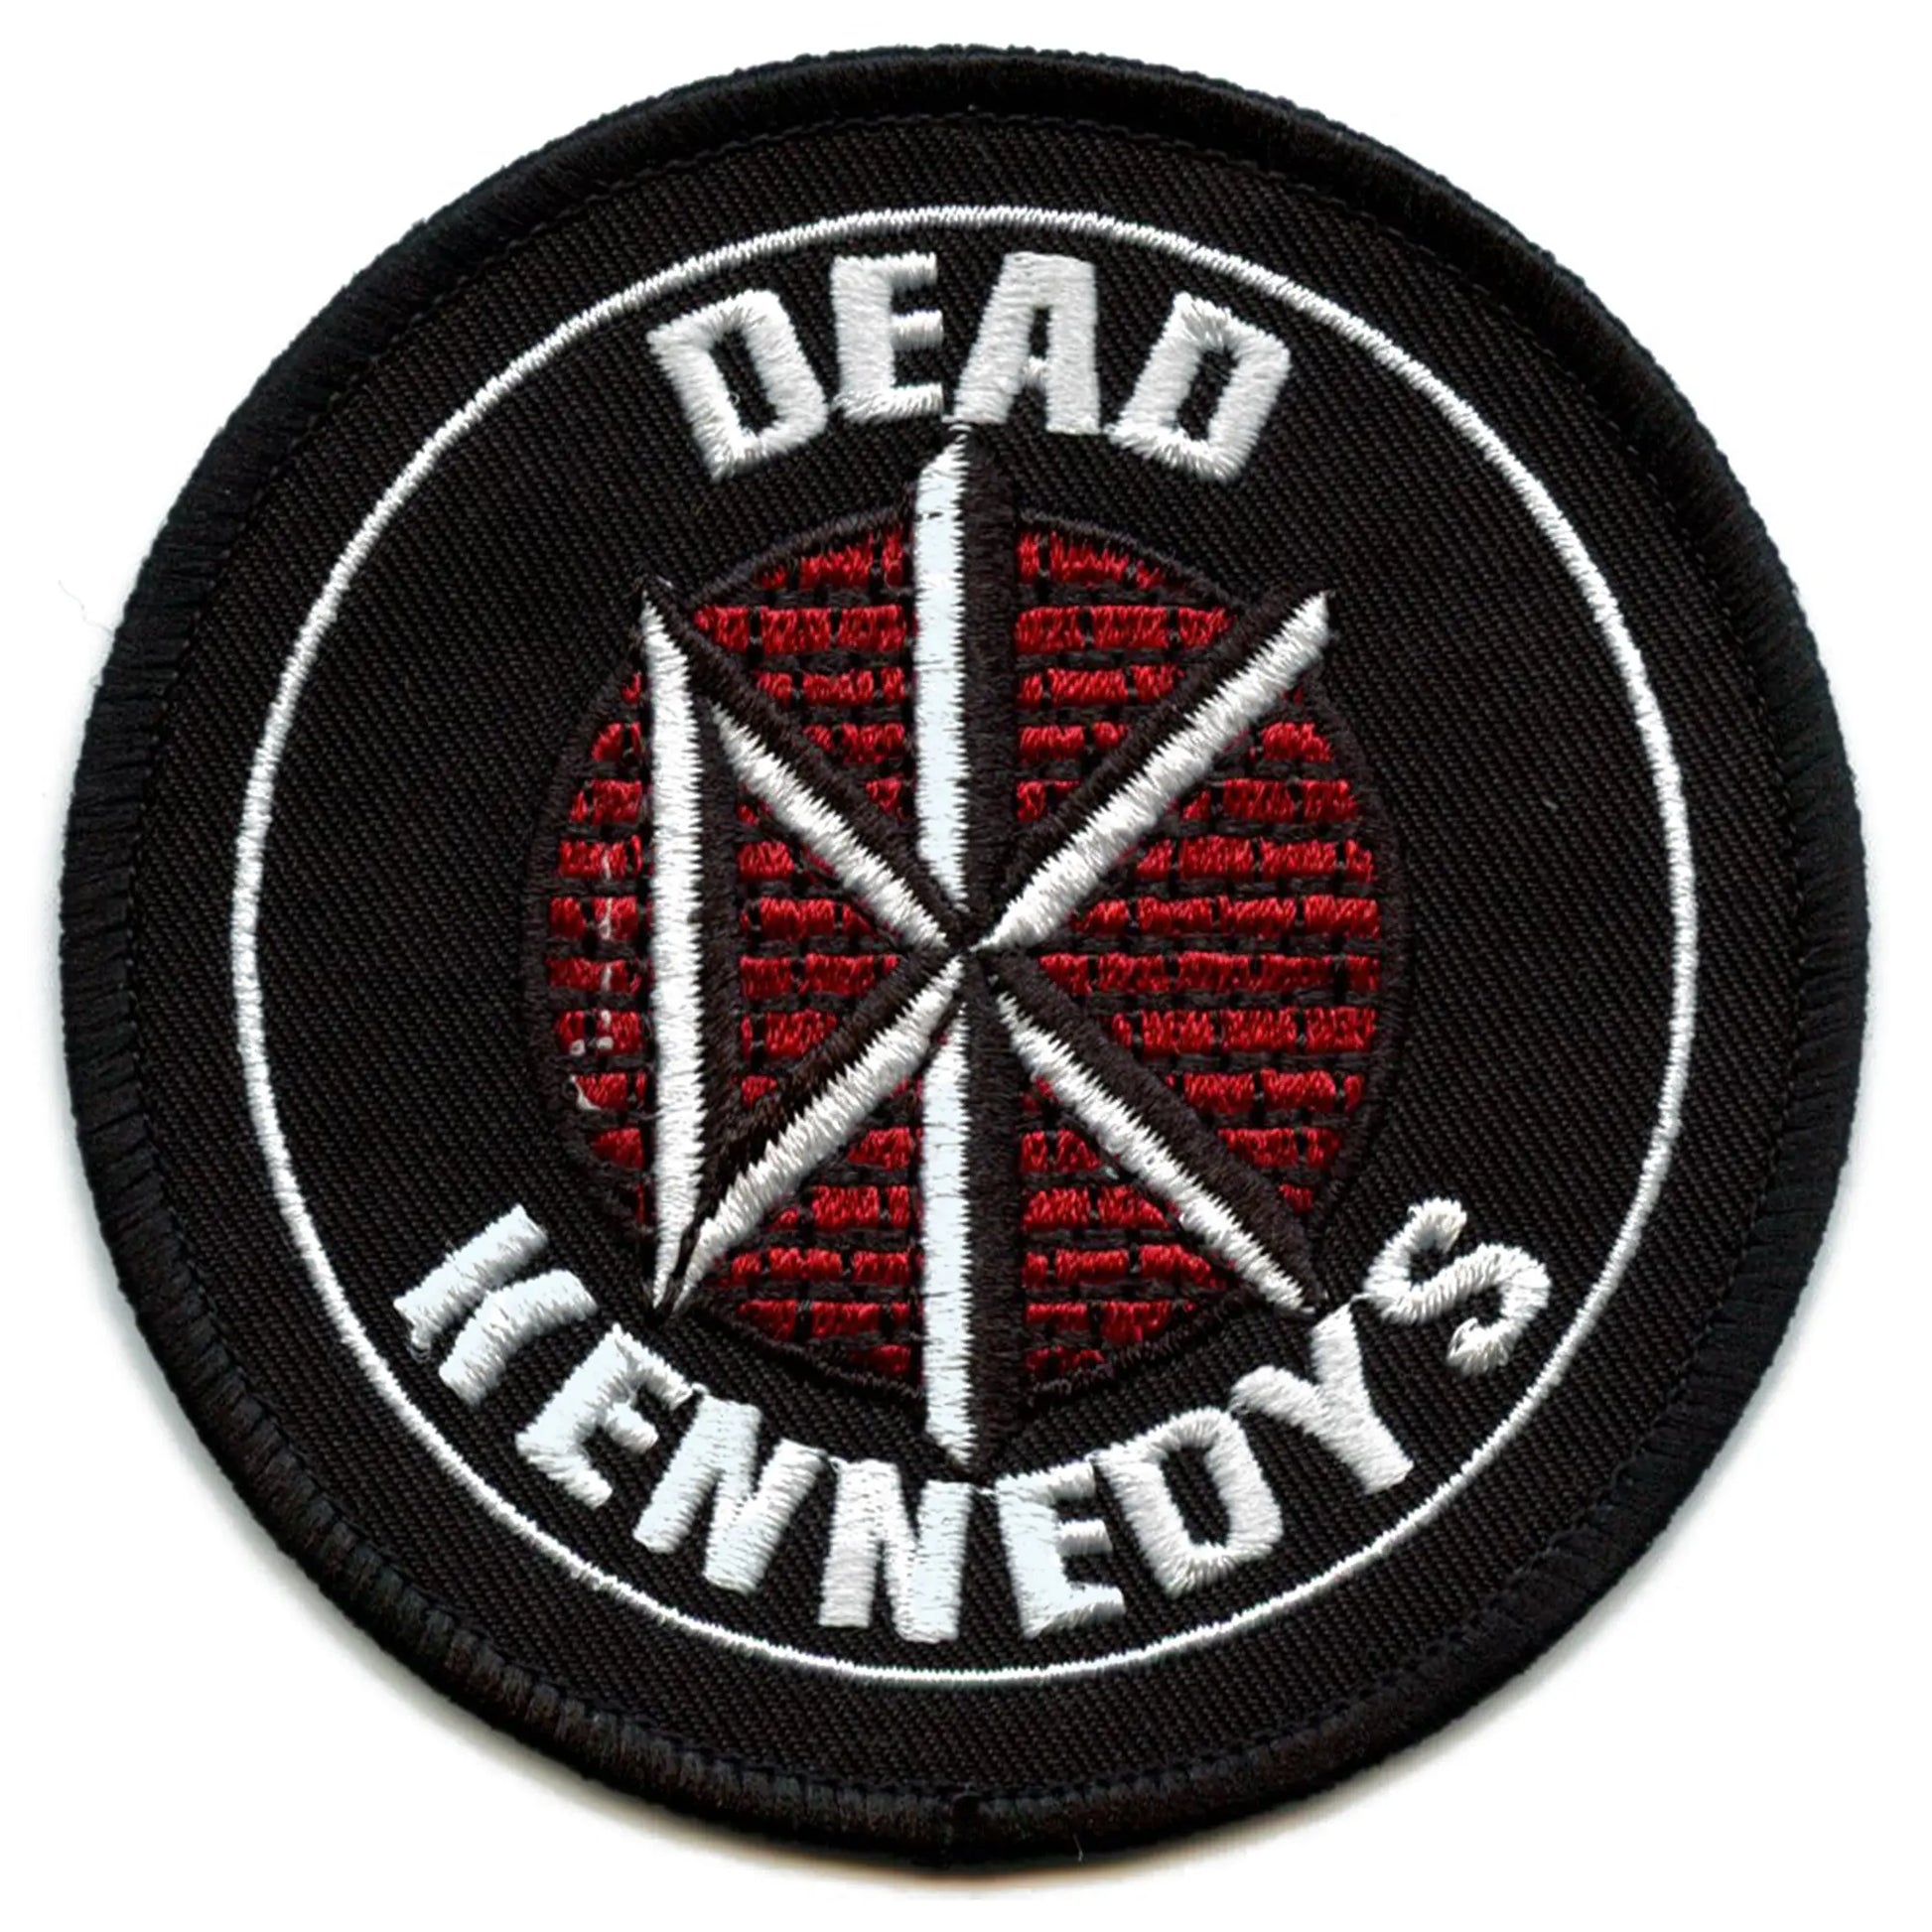 Dead Kennedys Classic Logo Patch Punk Rock Band Embroidered Iron On